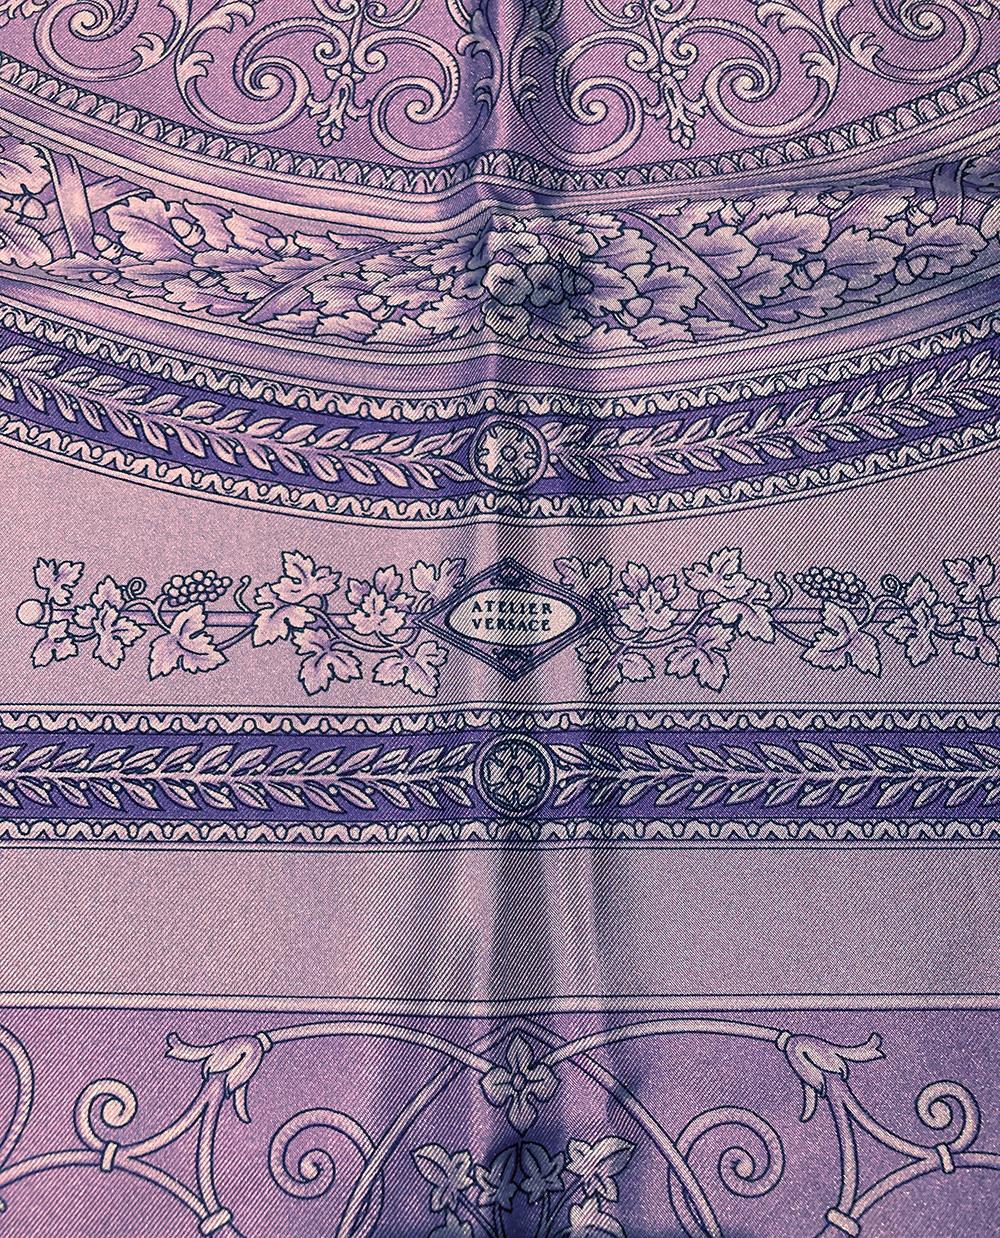 Vintage Versace Purple Silk Scarf in excellent condition. 100% silk, hand rolled hem. tag attached. c1990s. no stains smells or fabric pulls. multi tonal purples with classic versace style filigree and ornate Grecian statue and floral print.